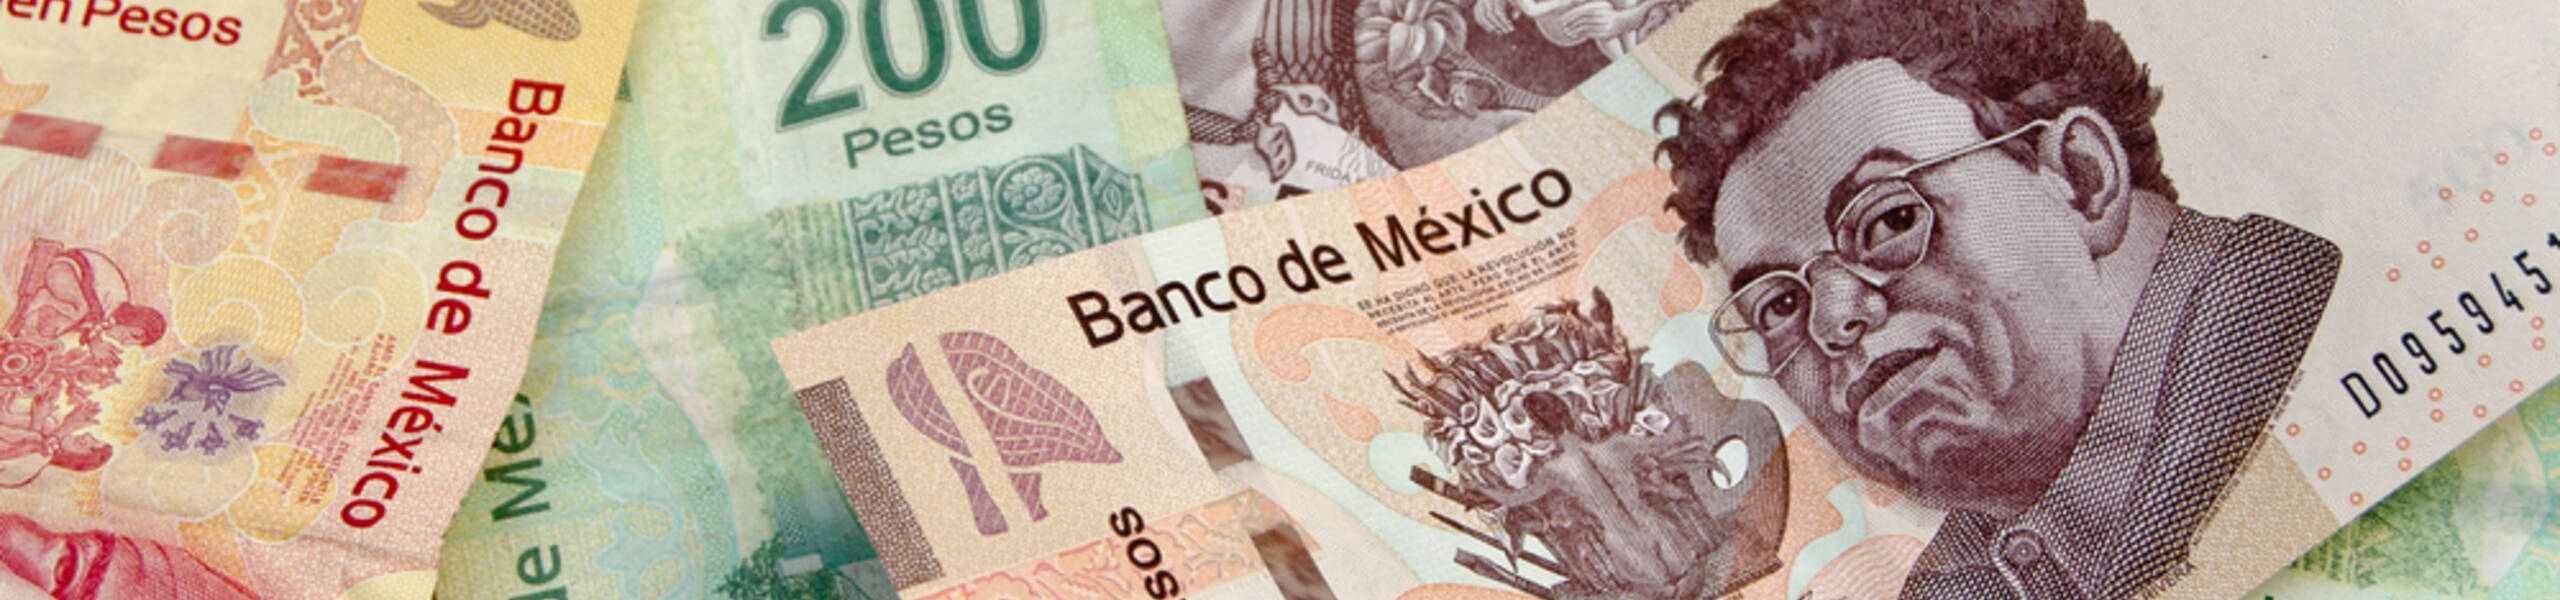 USD/MXN: the clues from the technical picture